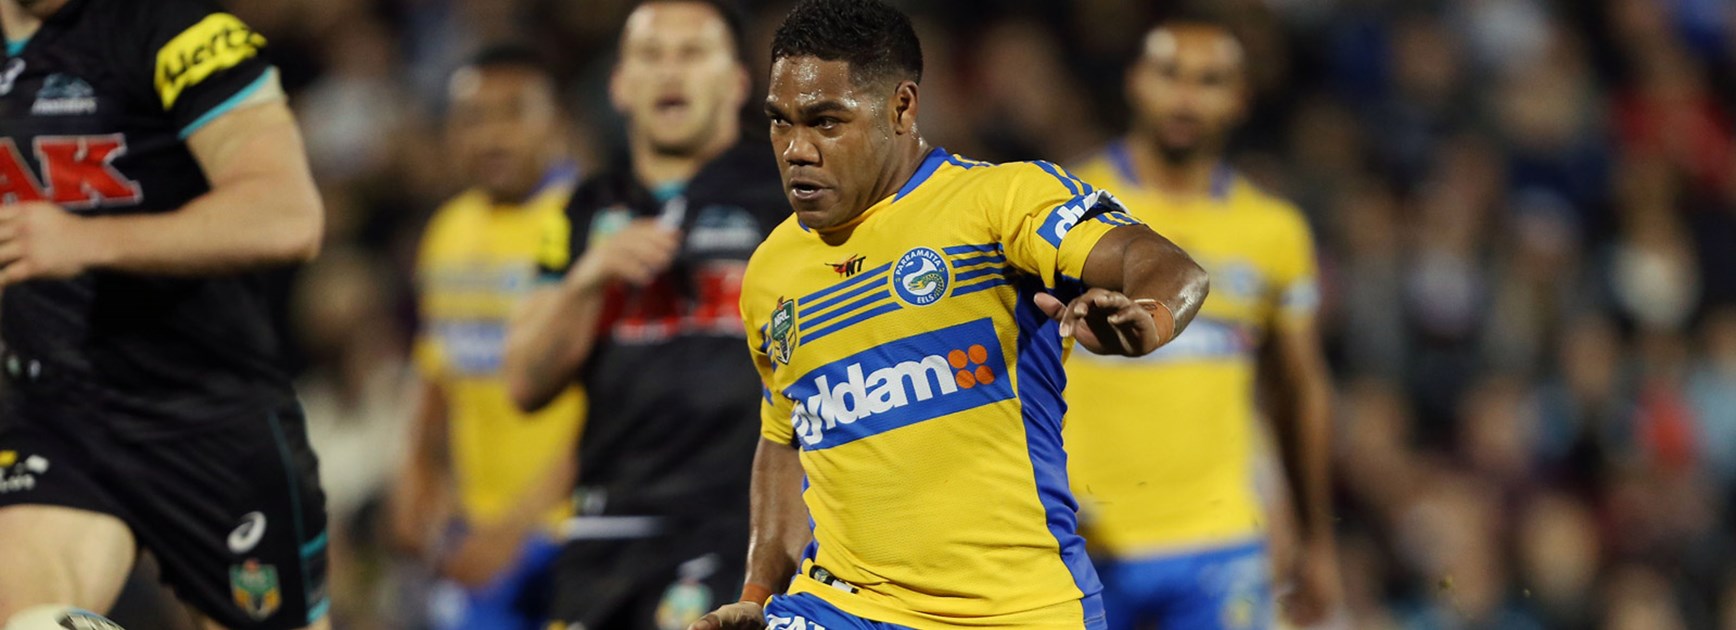 Eels halfback Chris Sandow kicked five from five conversion attempts against the Panthers in Round 12.